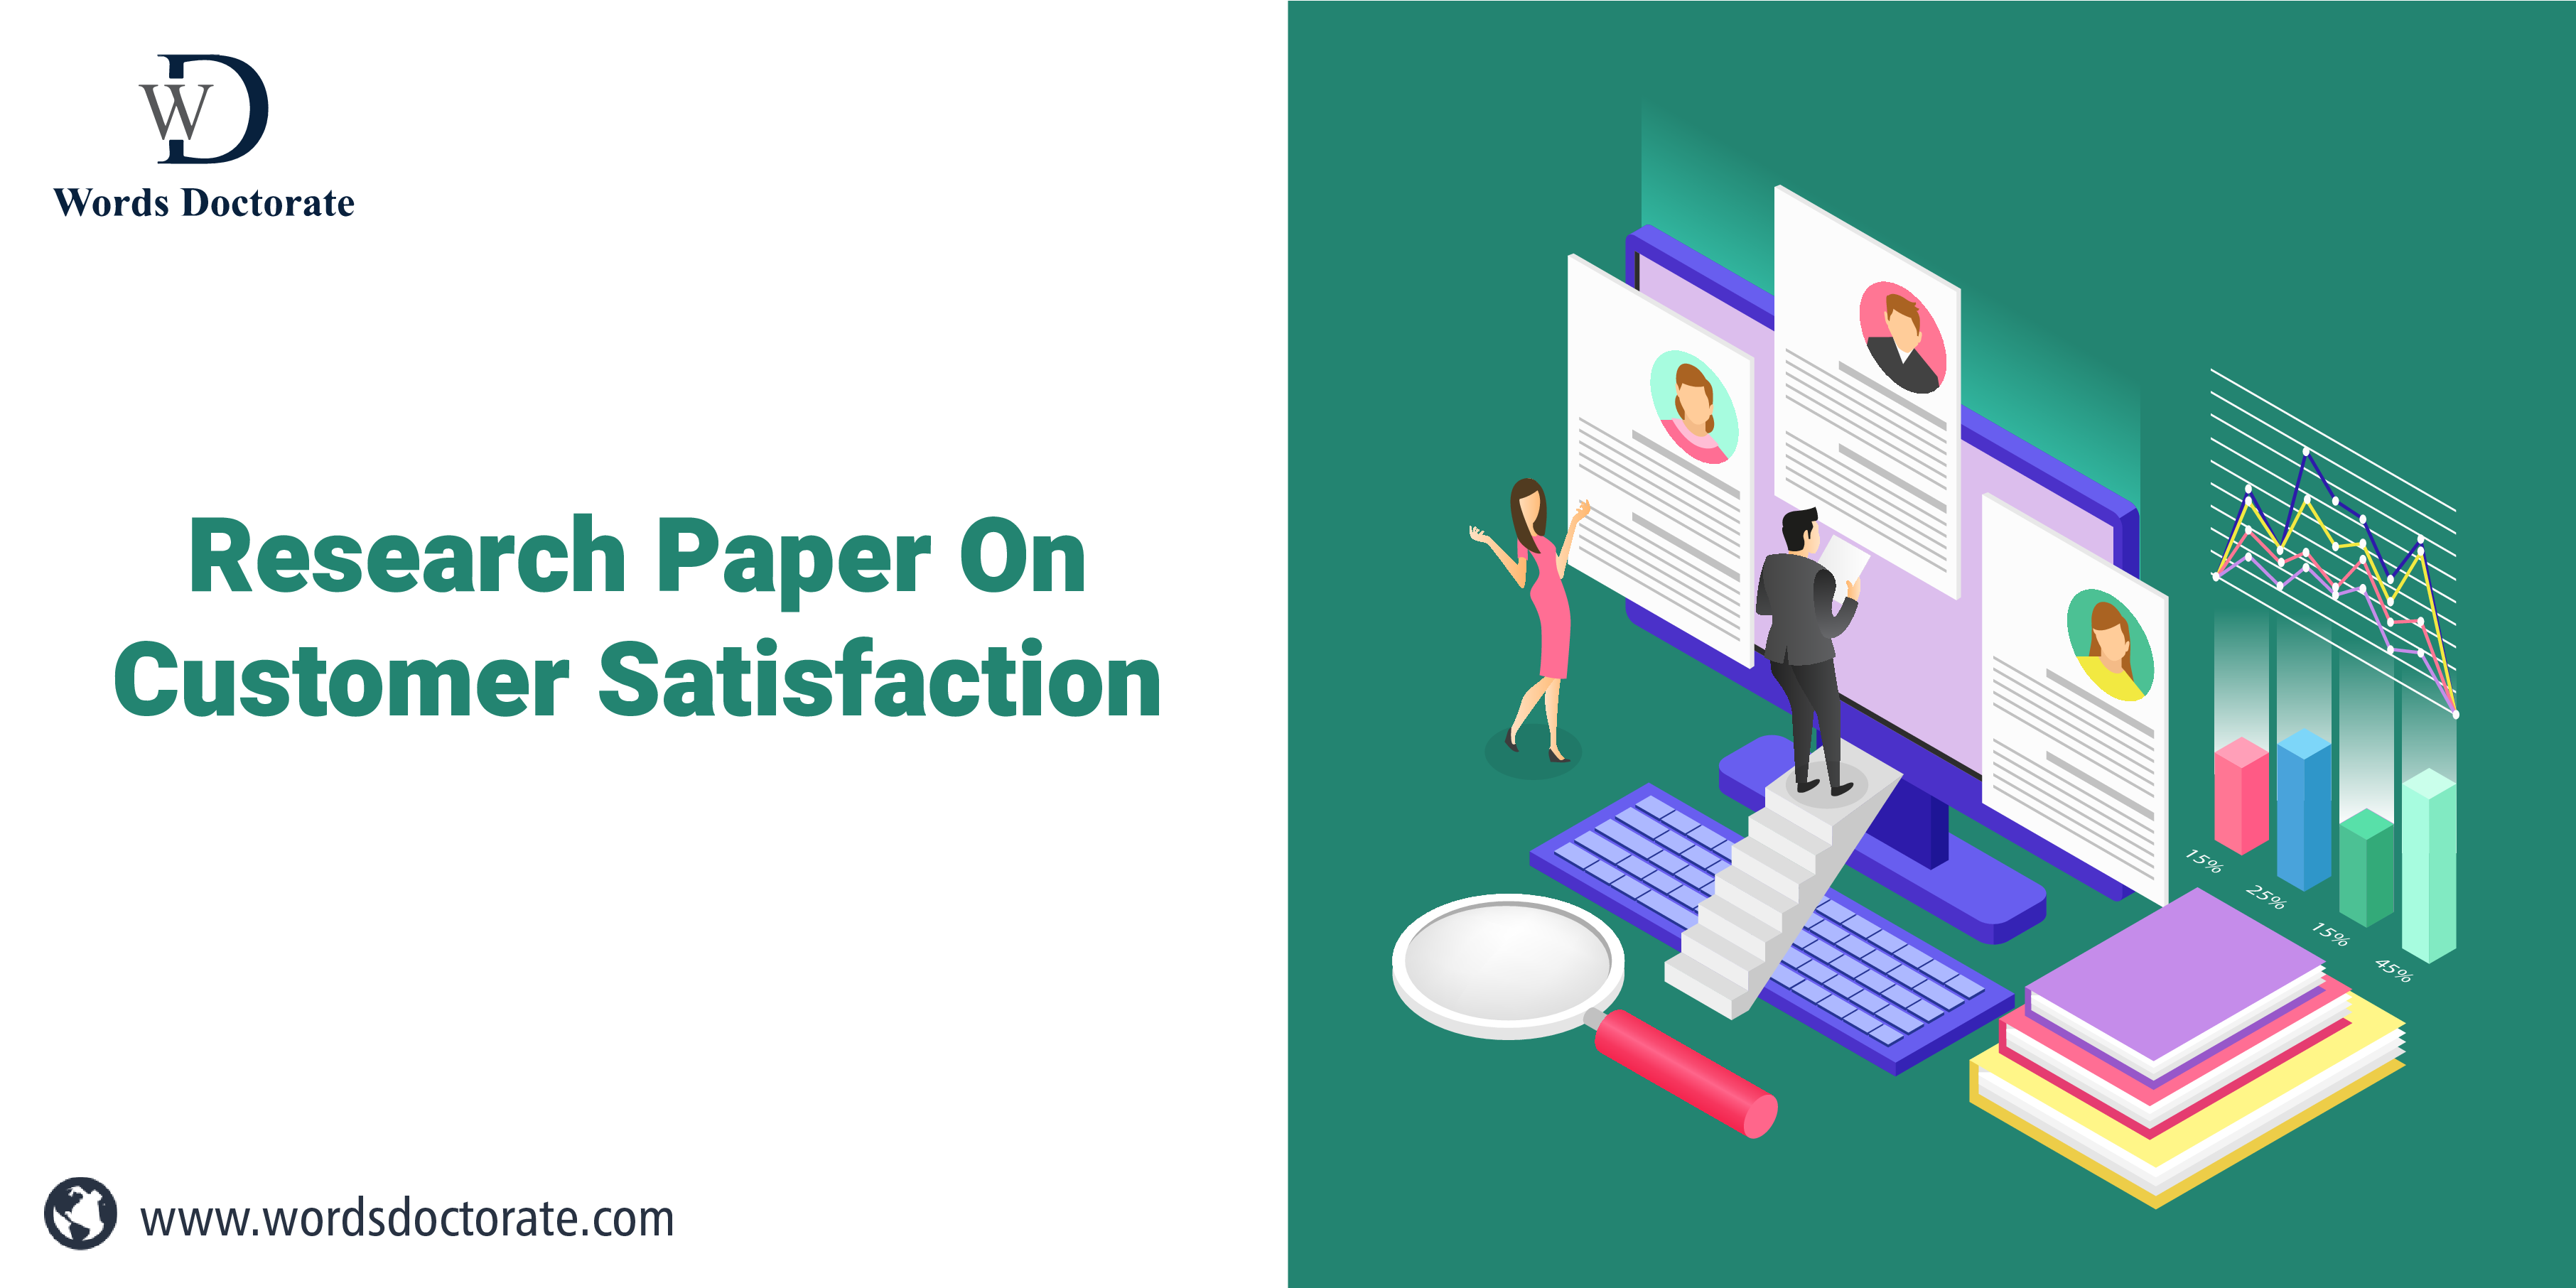 Research Paper on Customer Satisfaction